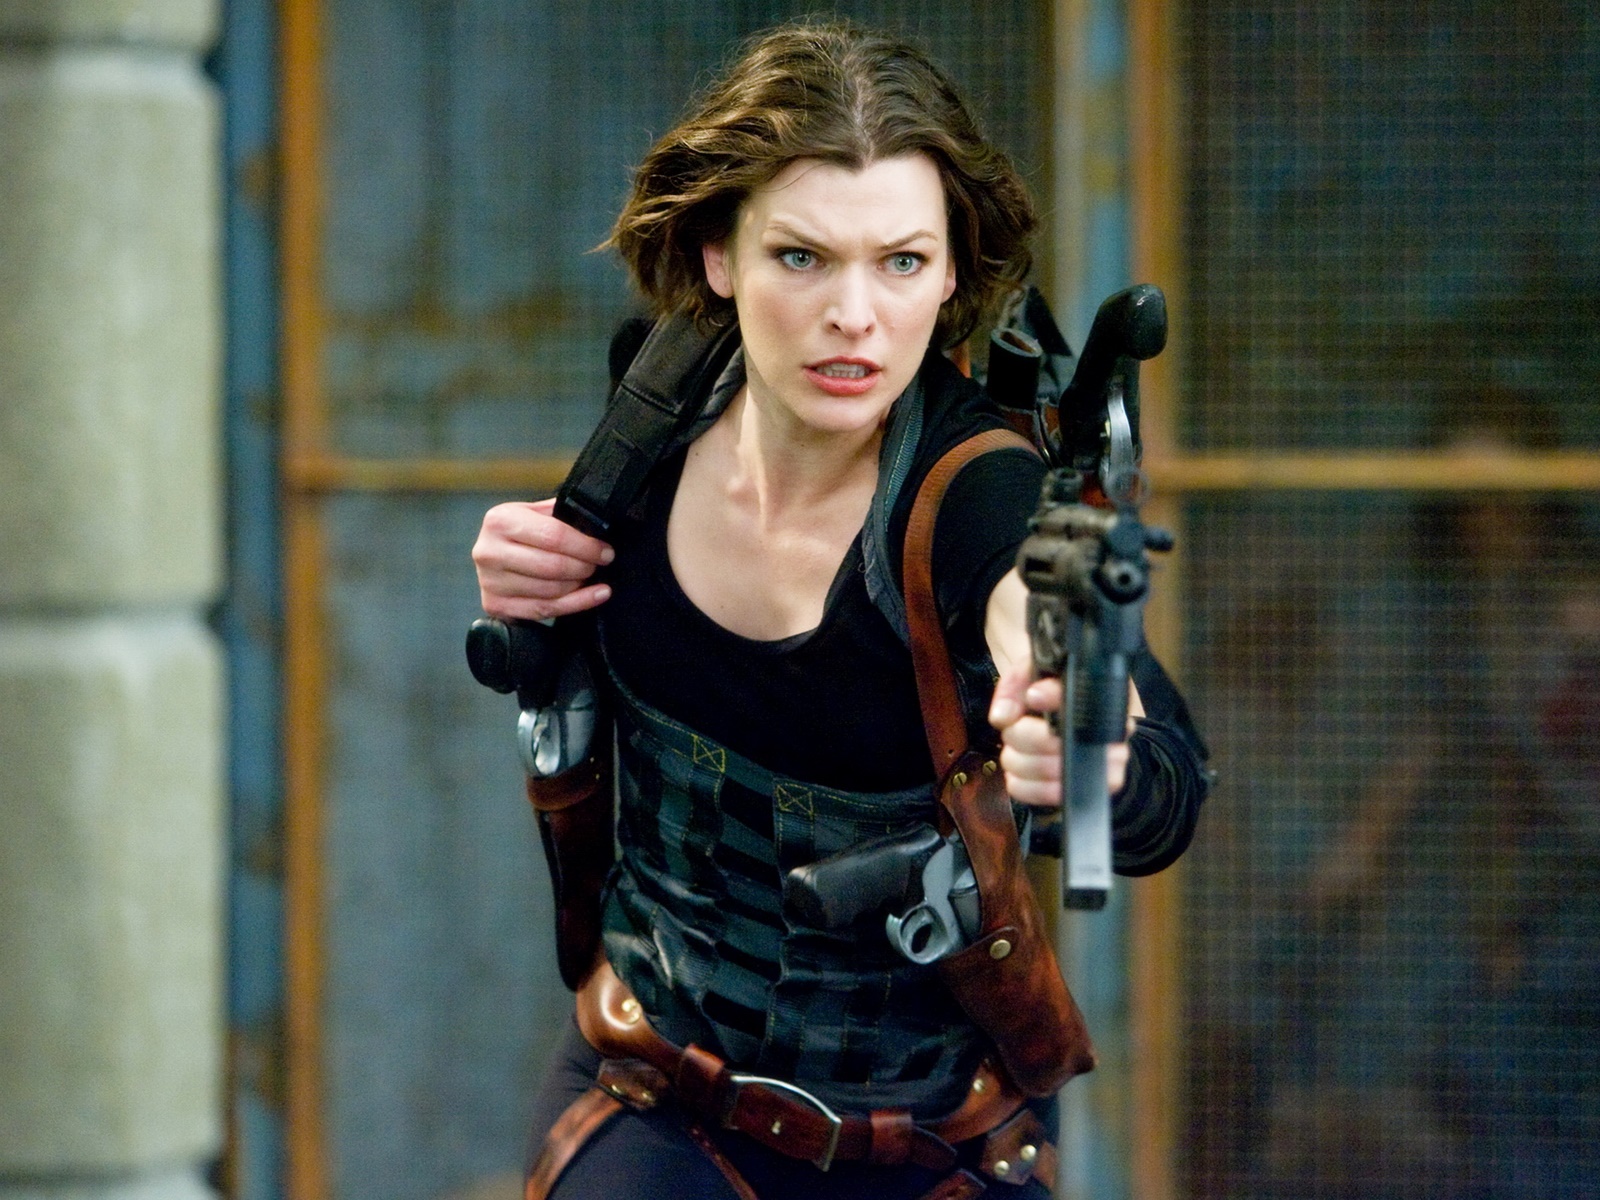 Would Milla Jovovich Ever Return To The Resident Evil Franchise?